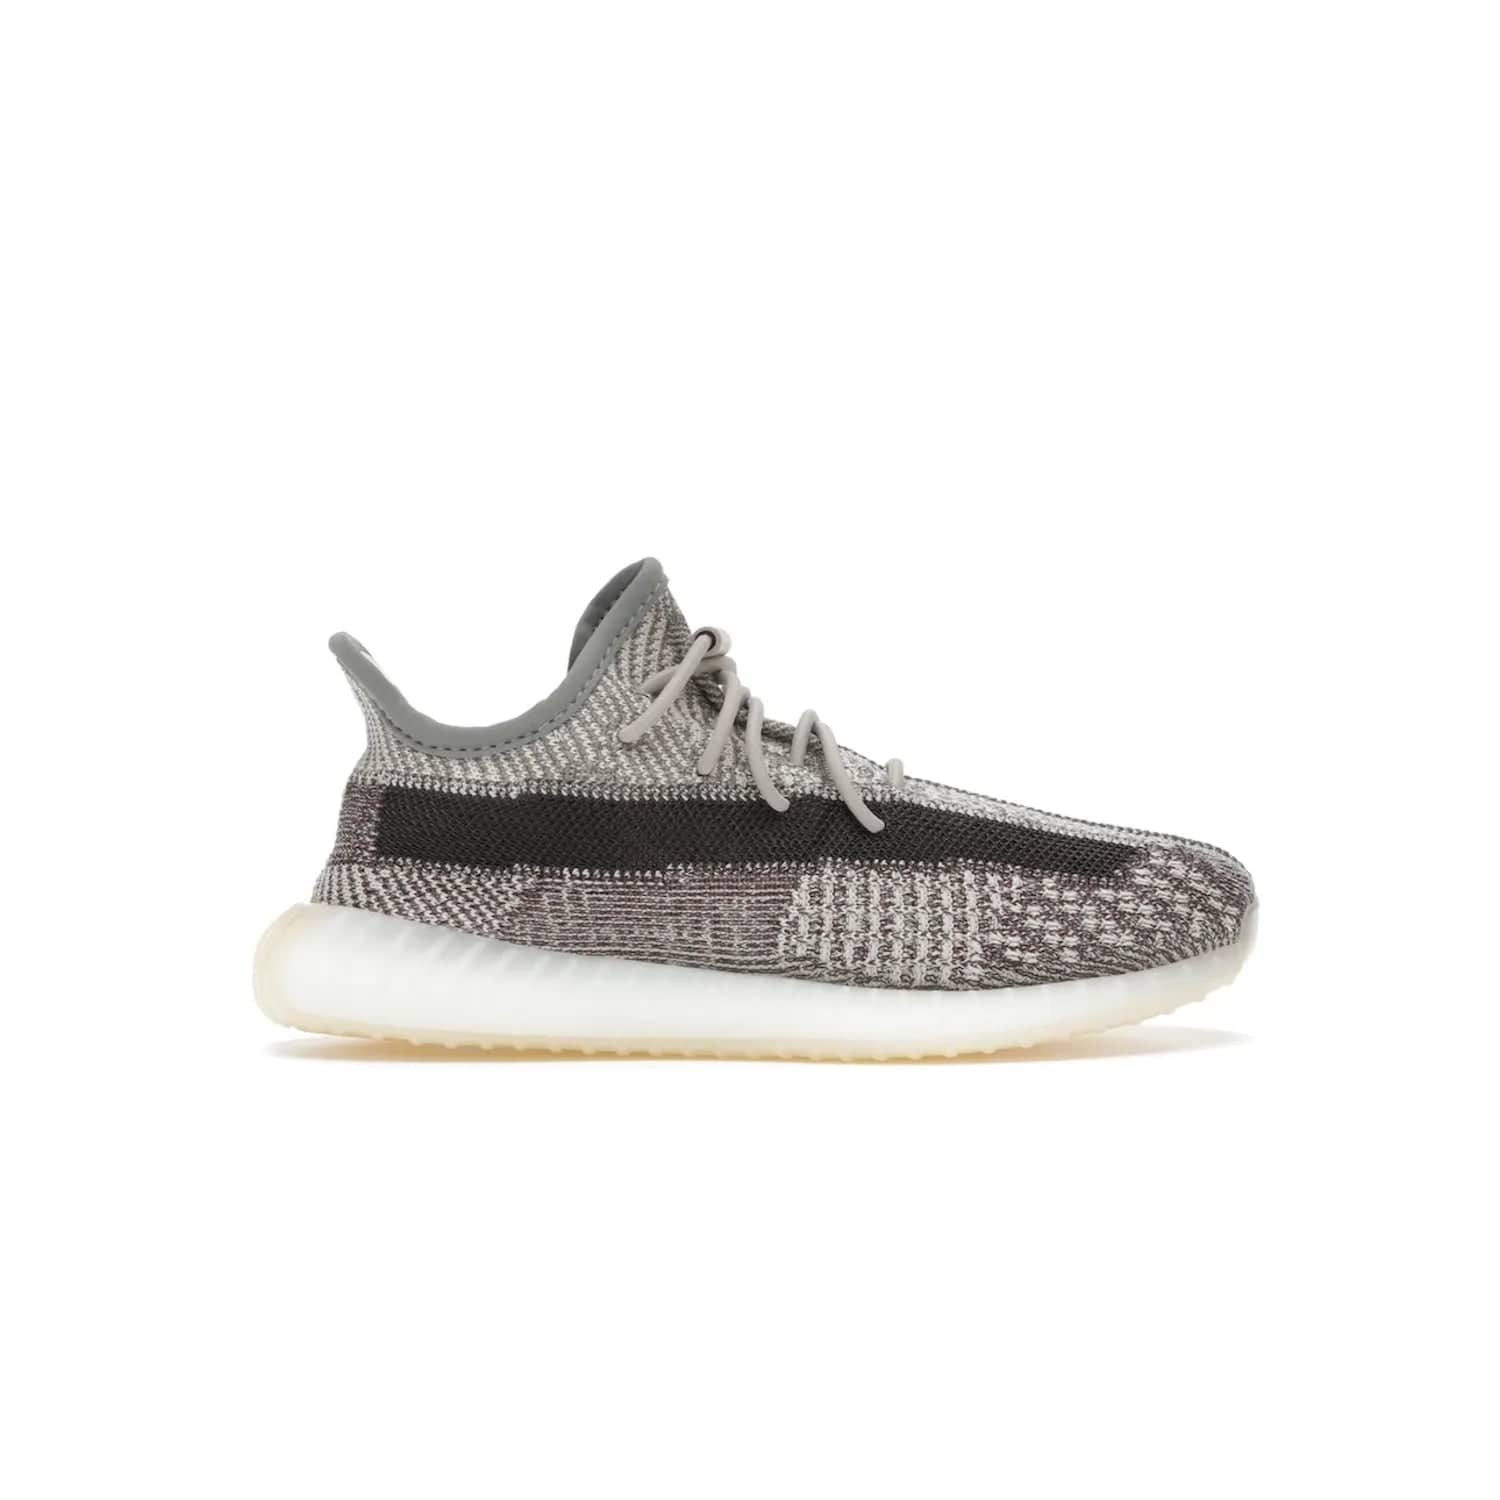 adidas Yeezy Boost 350 V2 Zyon (Kids) - Image 1 - Only at www.BallersClubKickz.com - The adidas Yeezy Boost 350 V2 Zyon (Kids) - perfect pick for fashion-savvy kids. Features soft Primeknit upper, lace closure & colorful patterning. Comfort & style for kids' summer outfits!